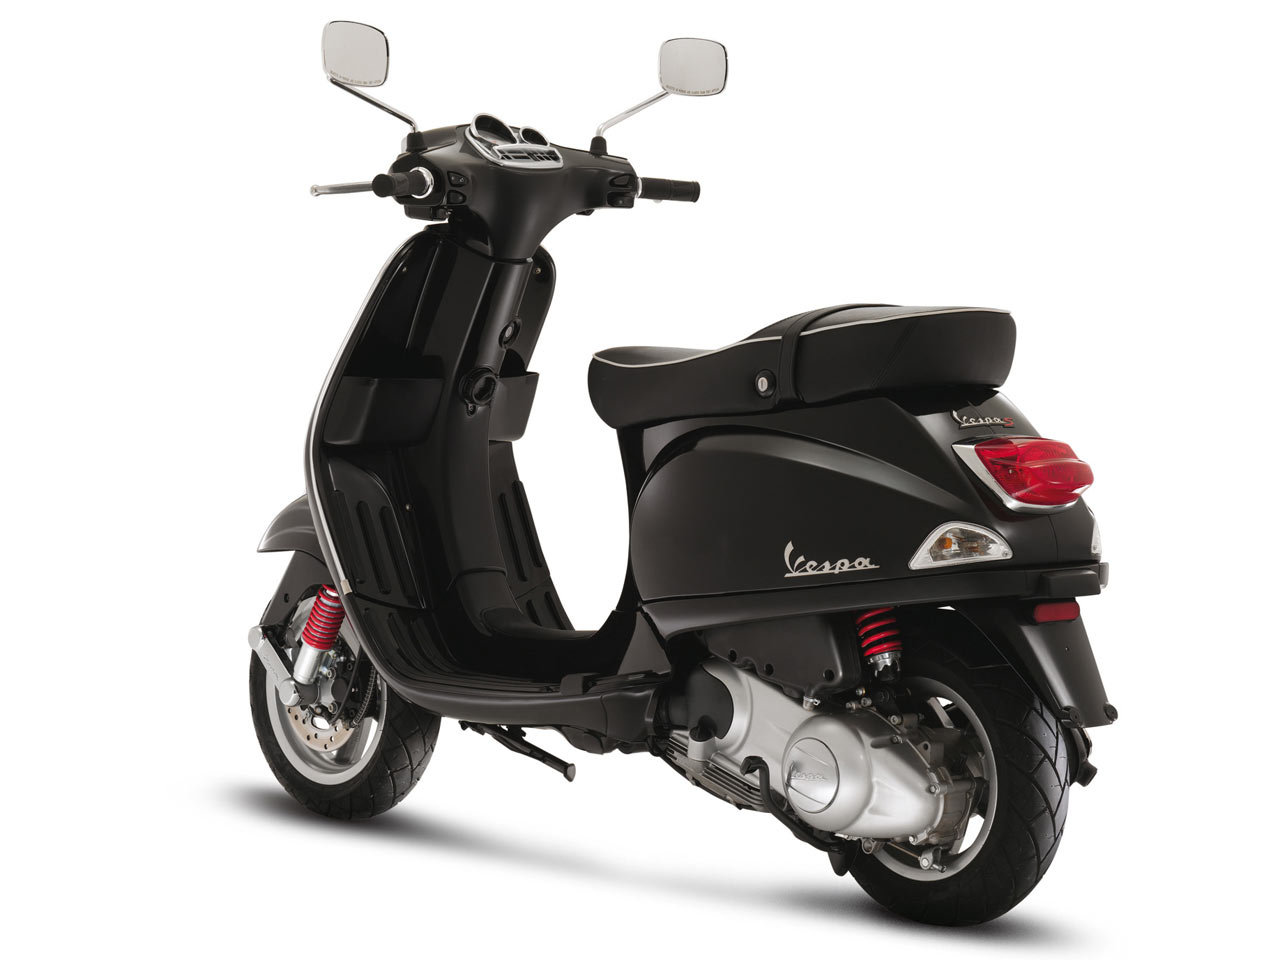 IBN   Indian Biker News  Piaggio to launch exciting Variants of Vespa